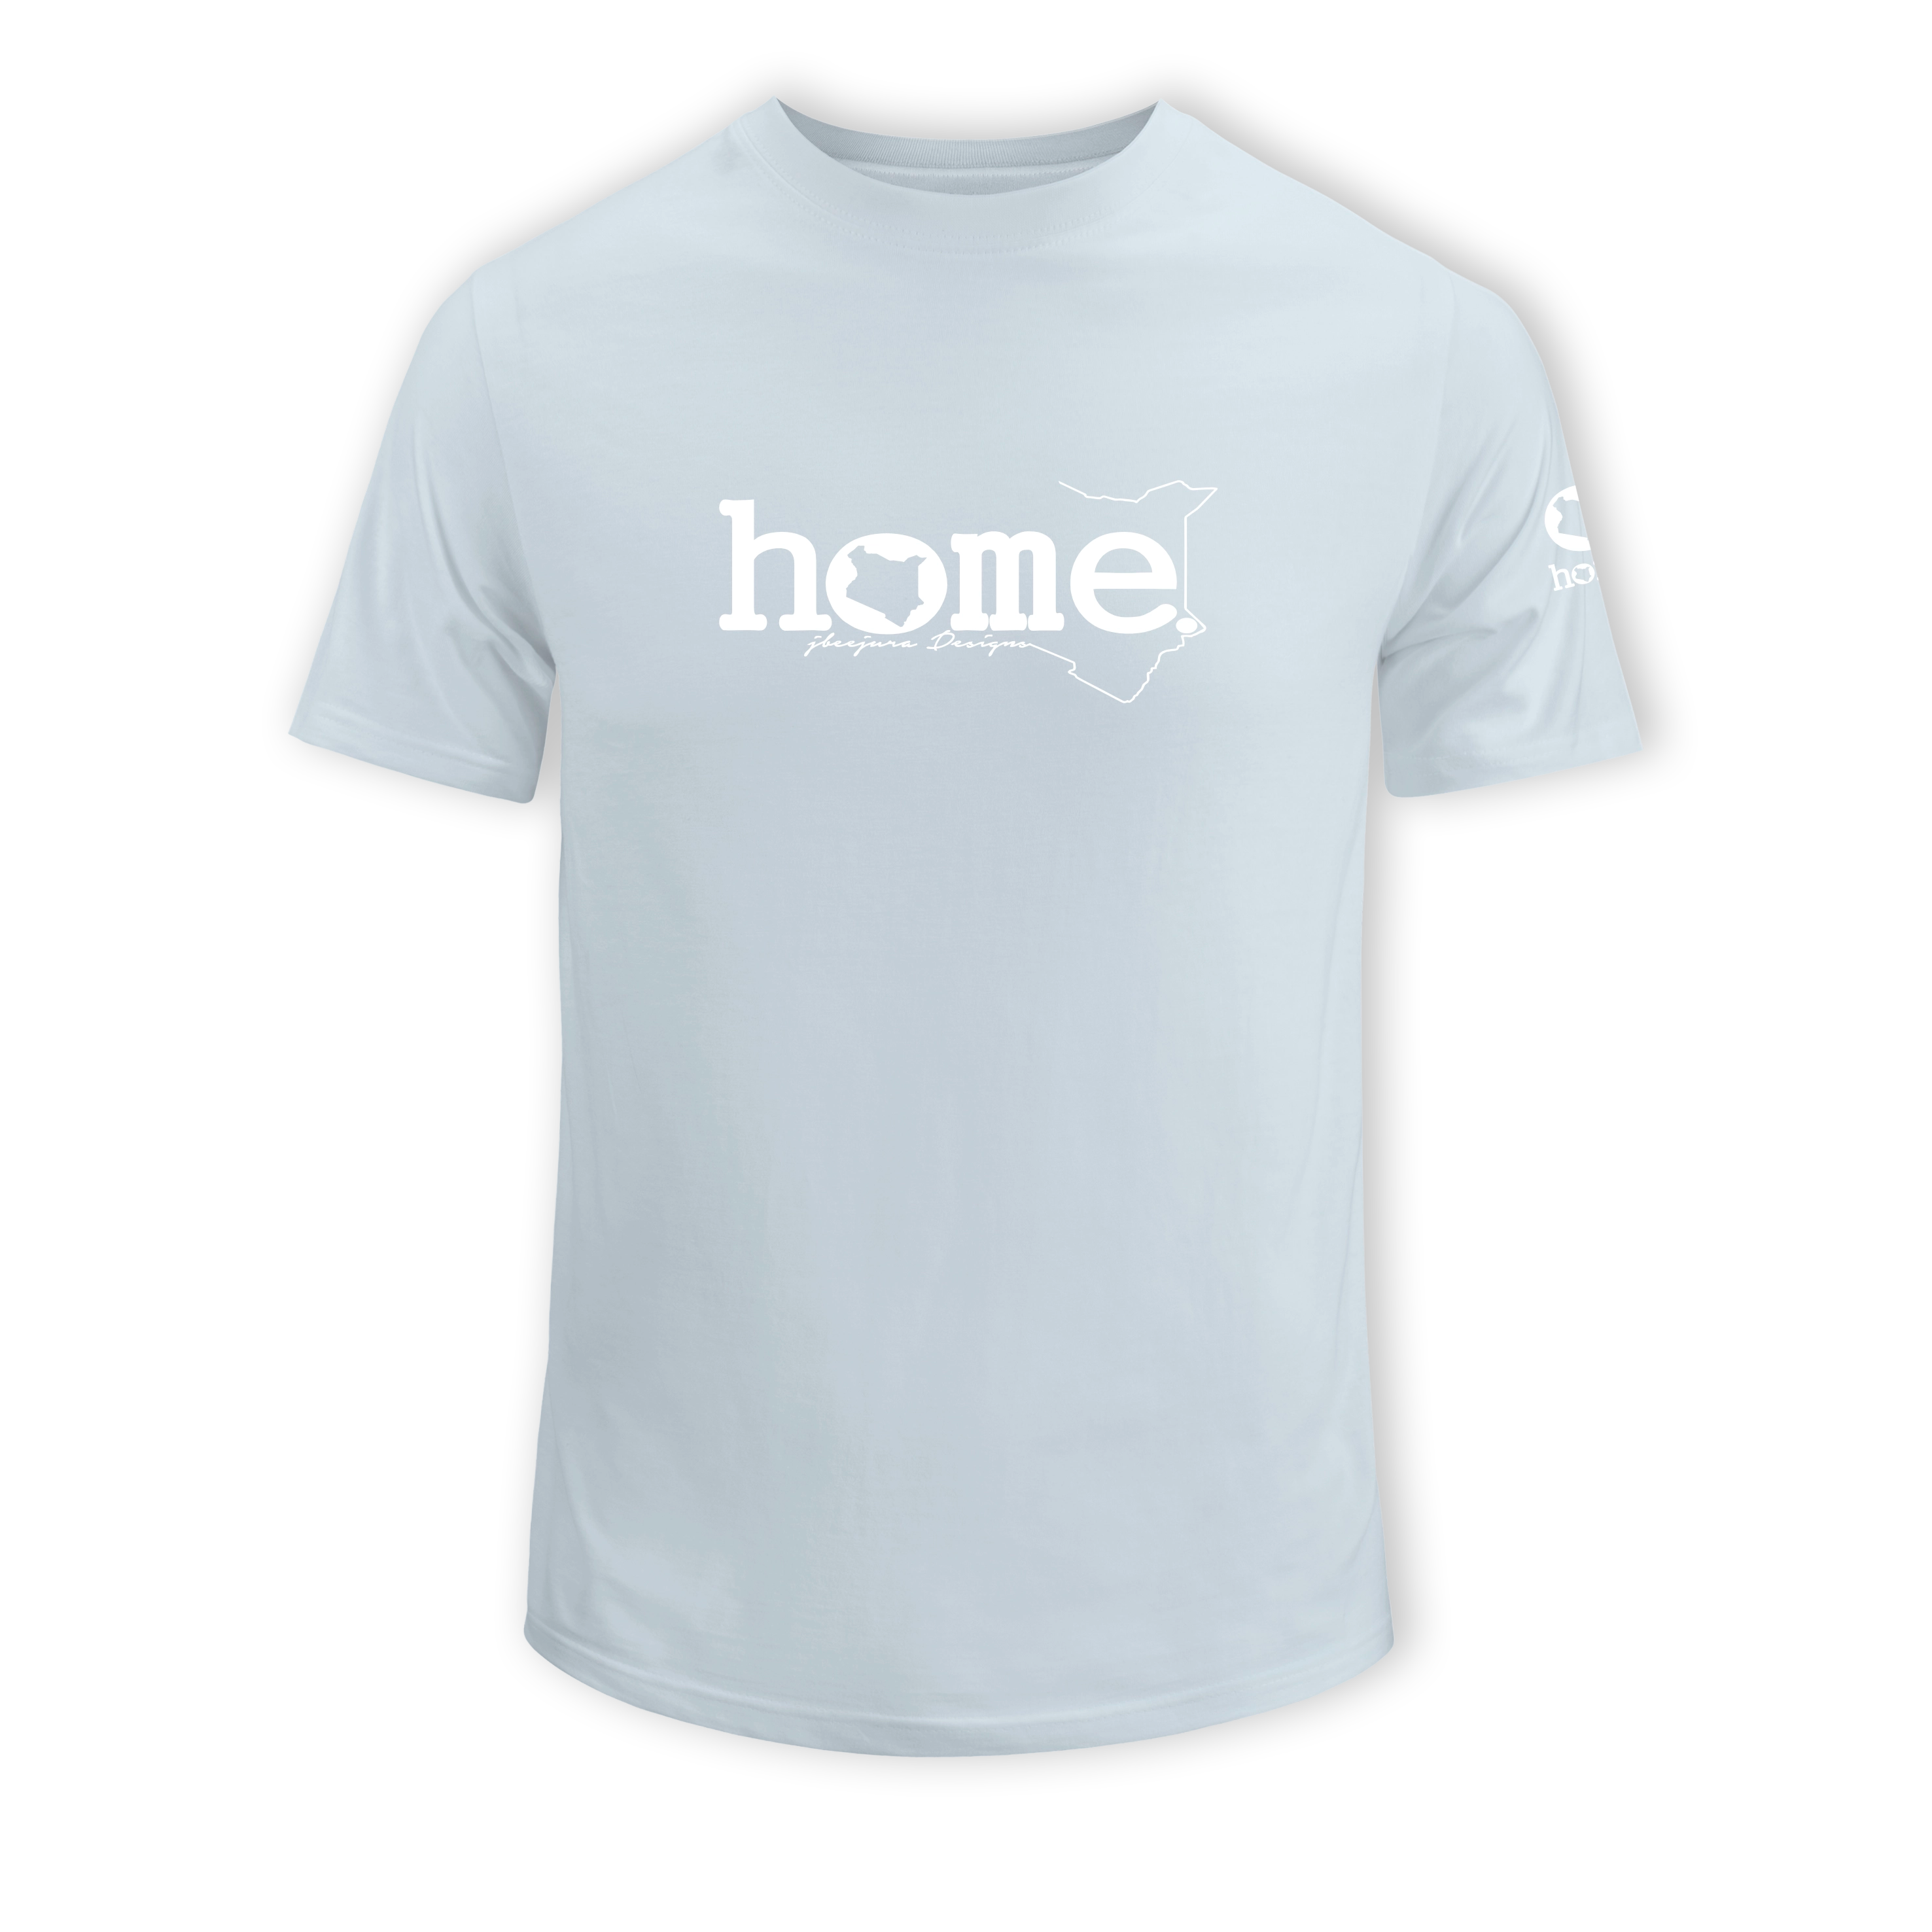 home_254 SHORT-SLEEVED SKY-BLUE T-SHIRT WITH A WHITE CLASSIC WORDS PRINT – COTTON PLUS FABRIC